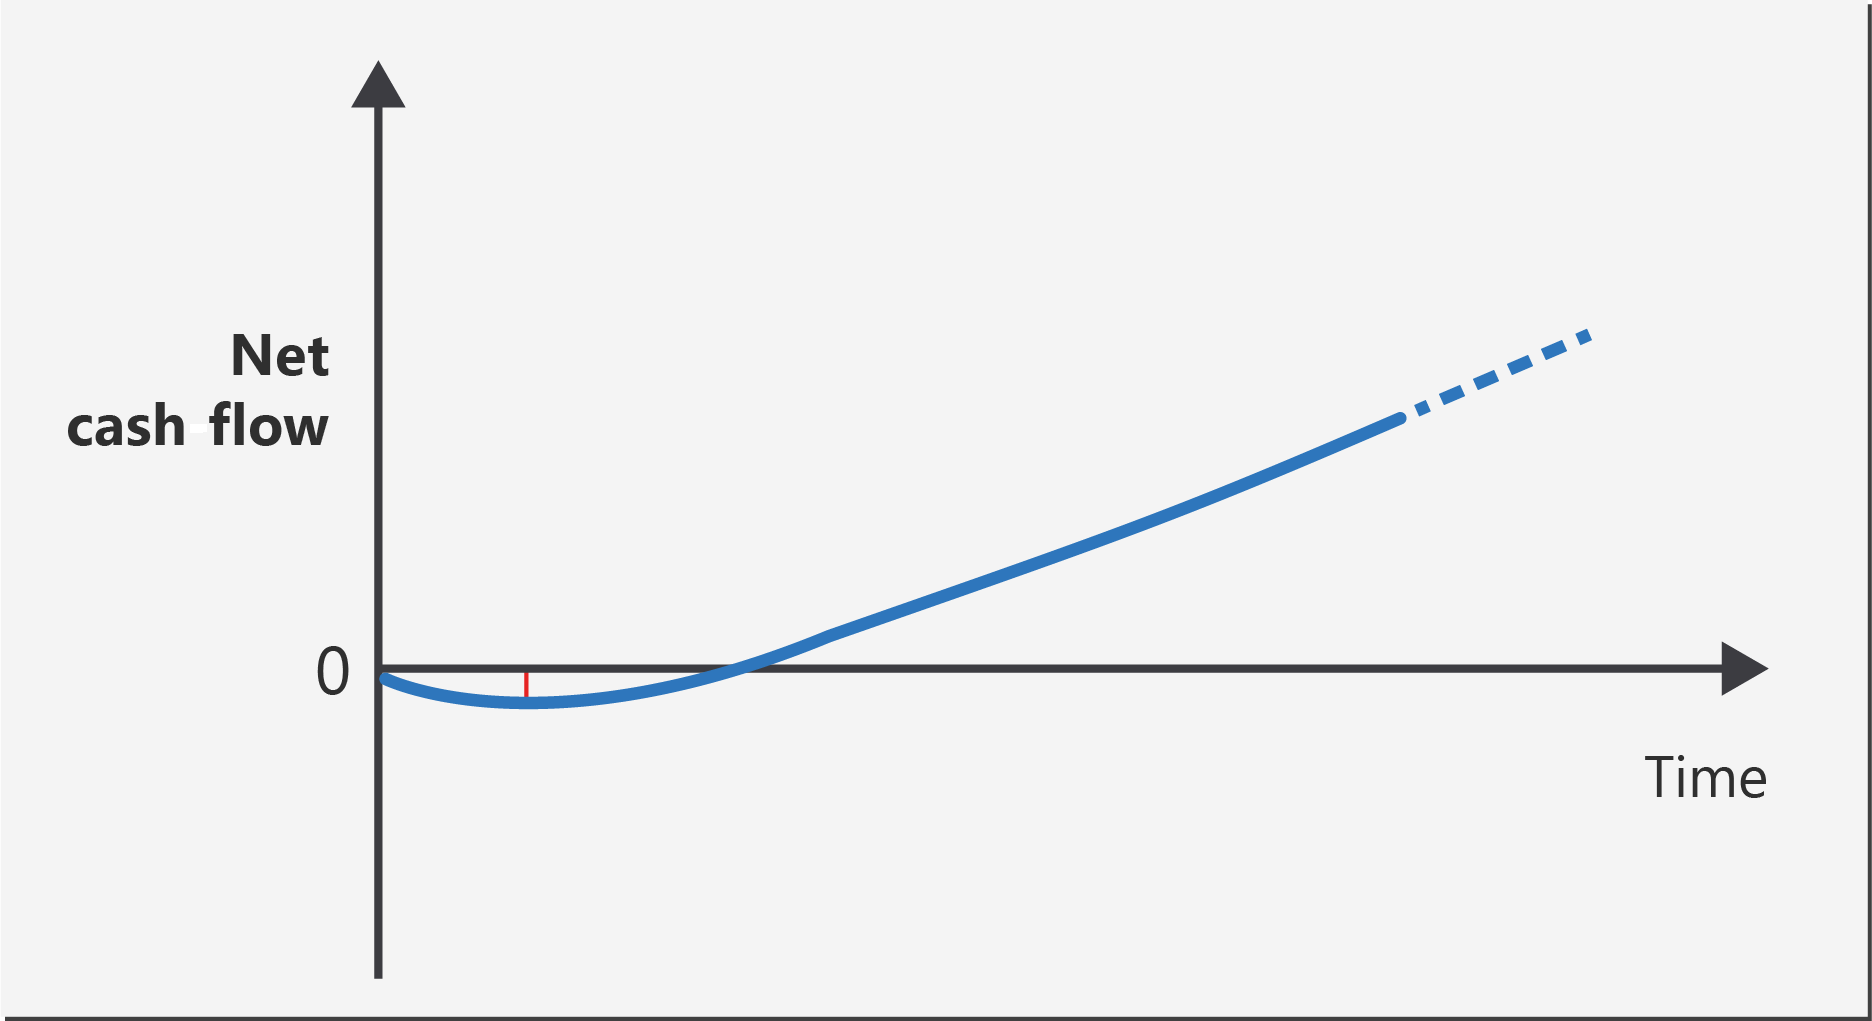 Line chart that shows net cash flow over time. The value starts at zero and briefly dips below zero. Then it becomes positive and steadily increases.